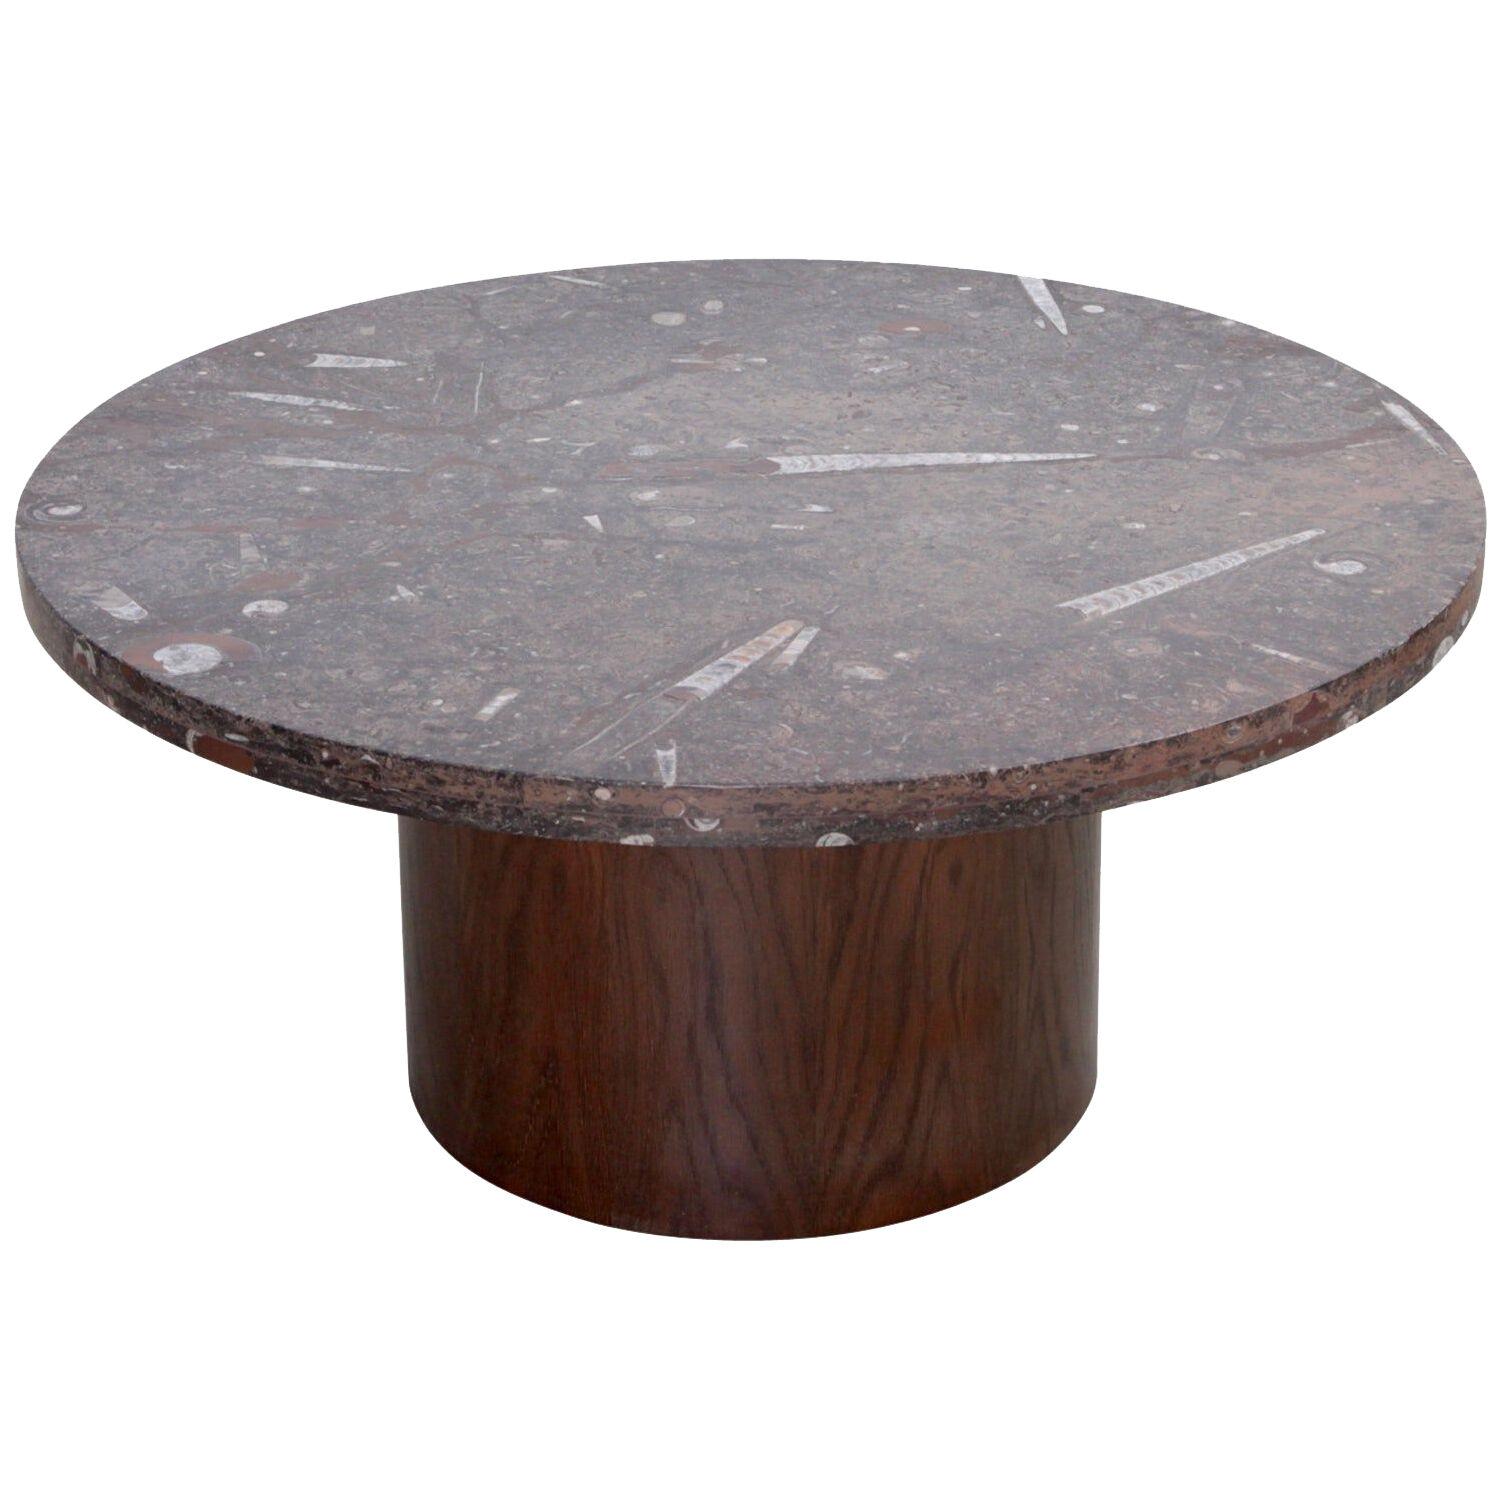 Heinz Lilienthal Coffee Table with Fossil Stone Top	